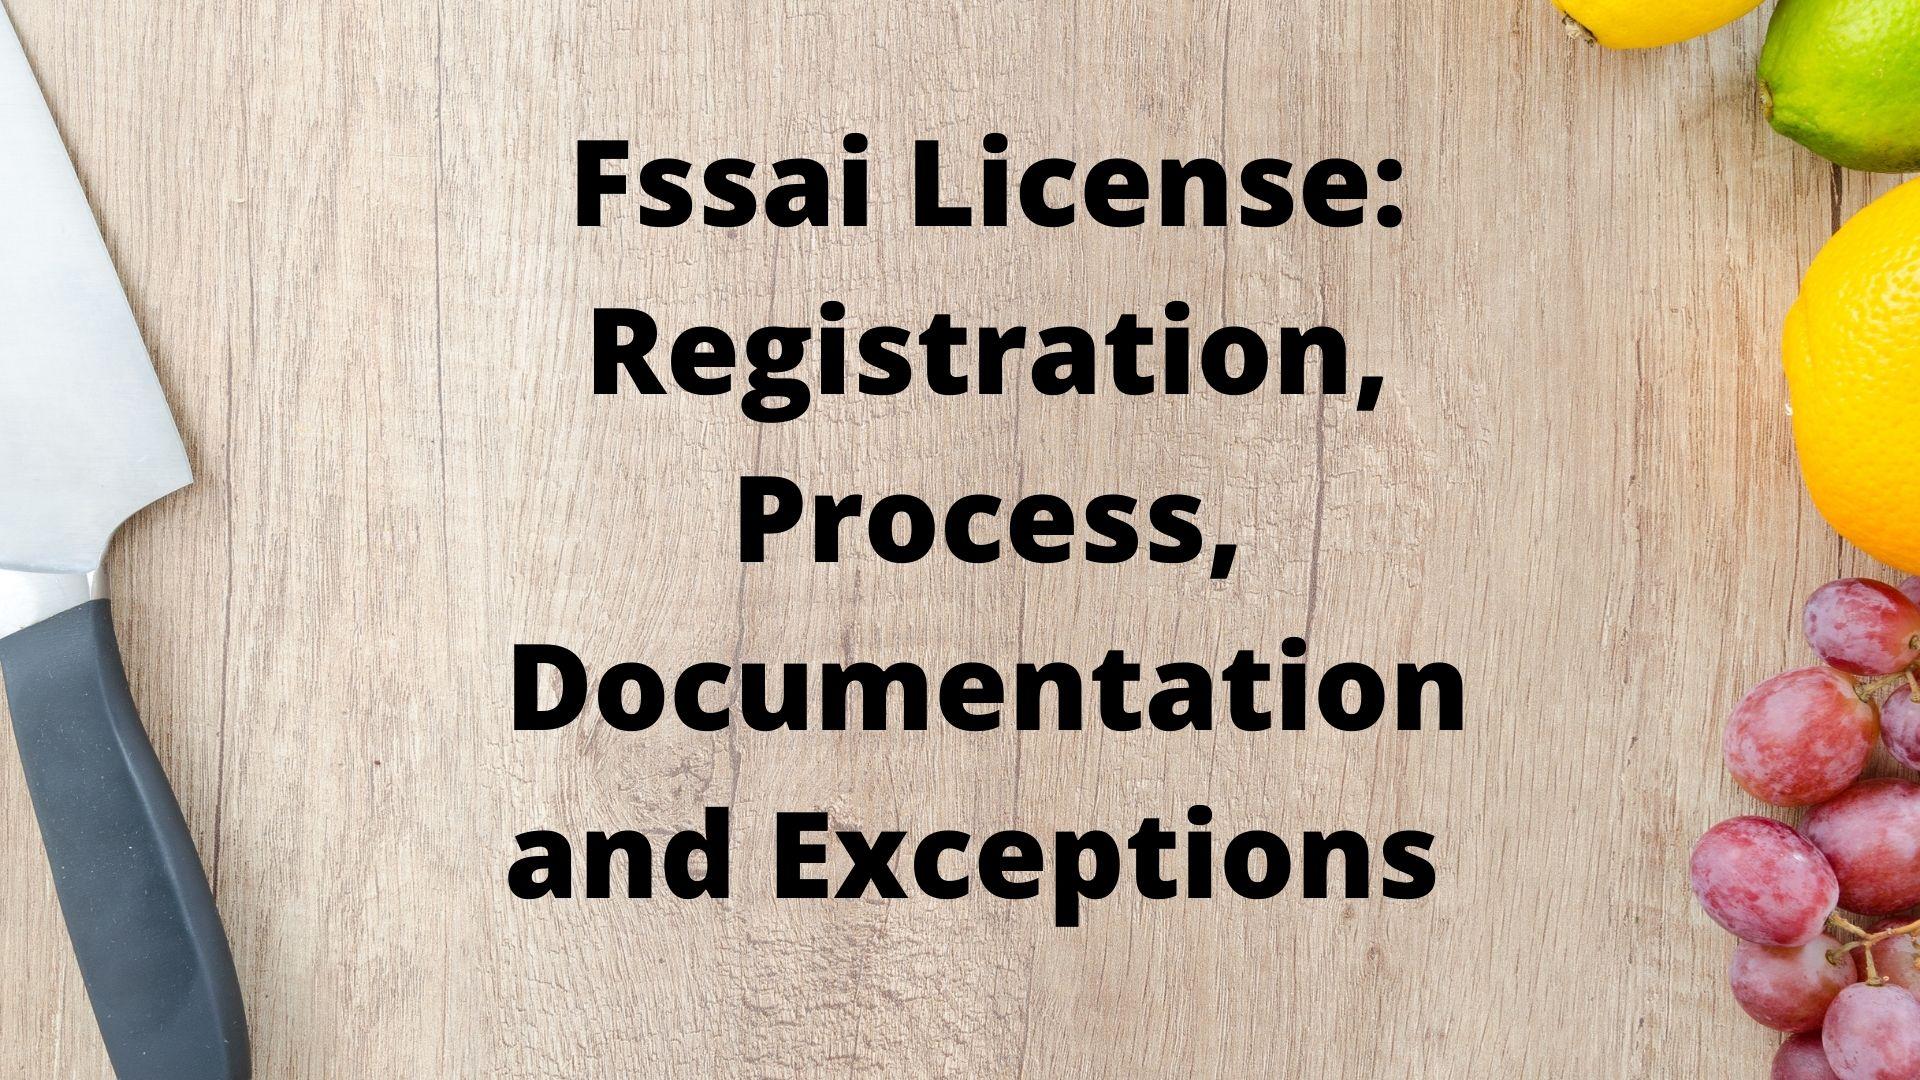 Fssai License Registration Process Documentation and Exceptions